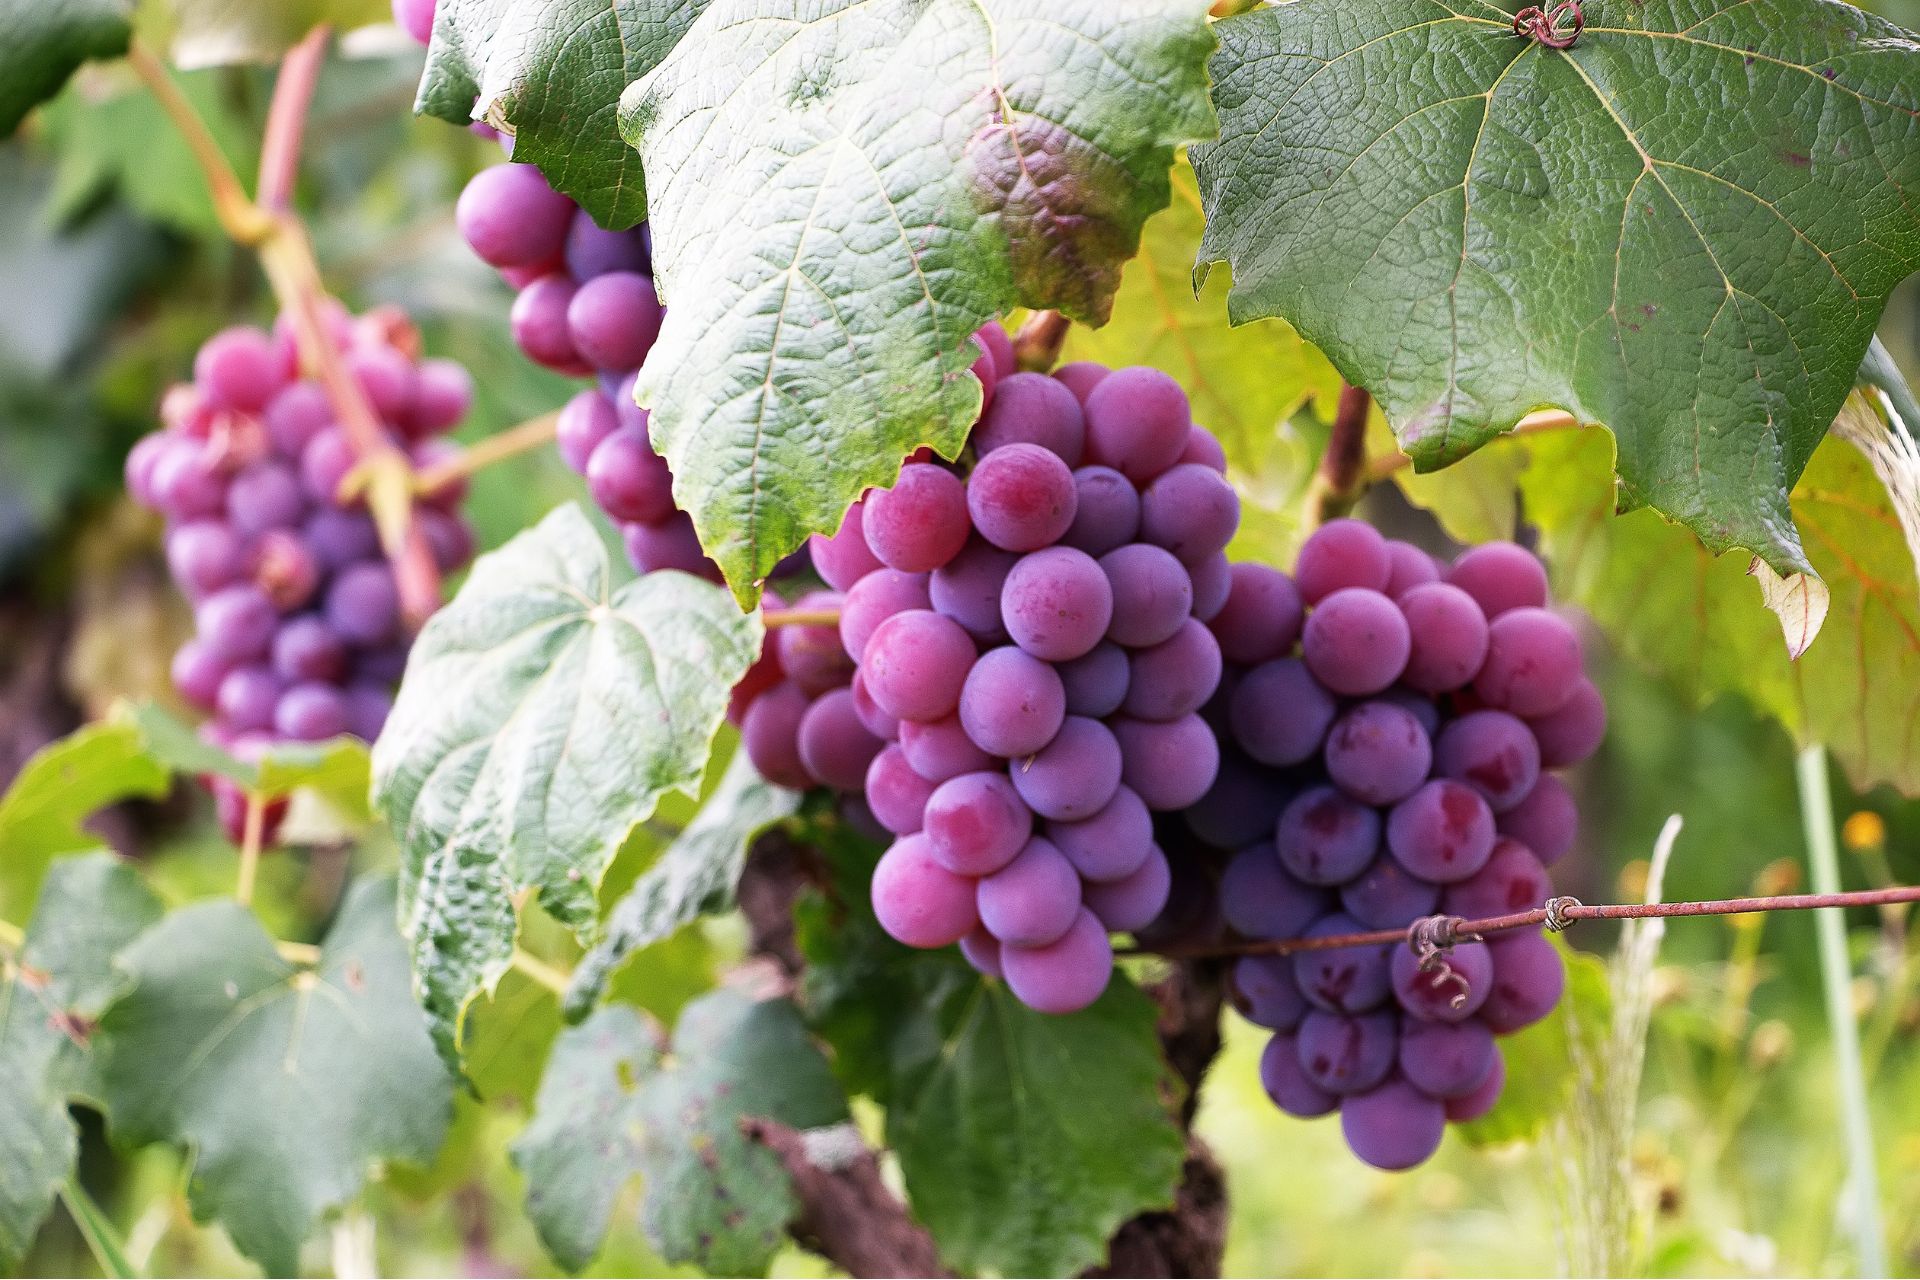 Ayurvedic Perspective on Grapes